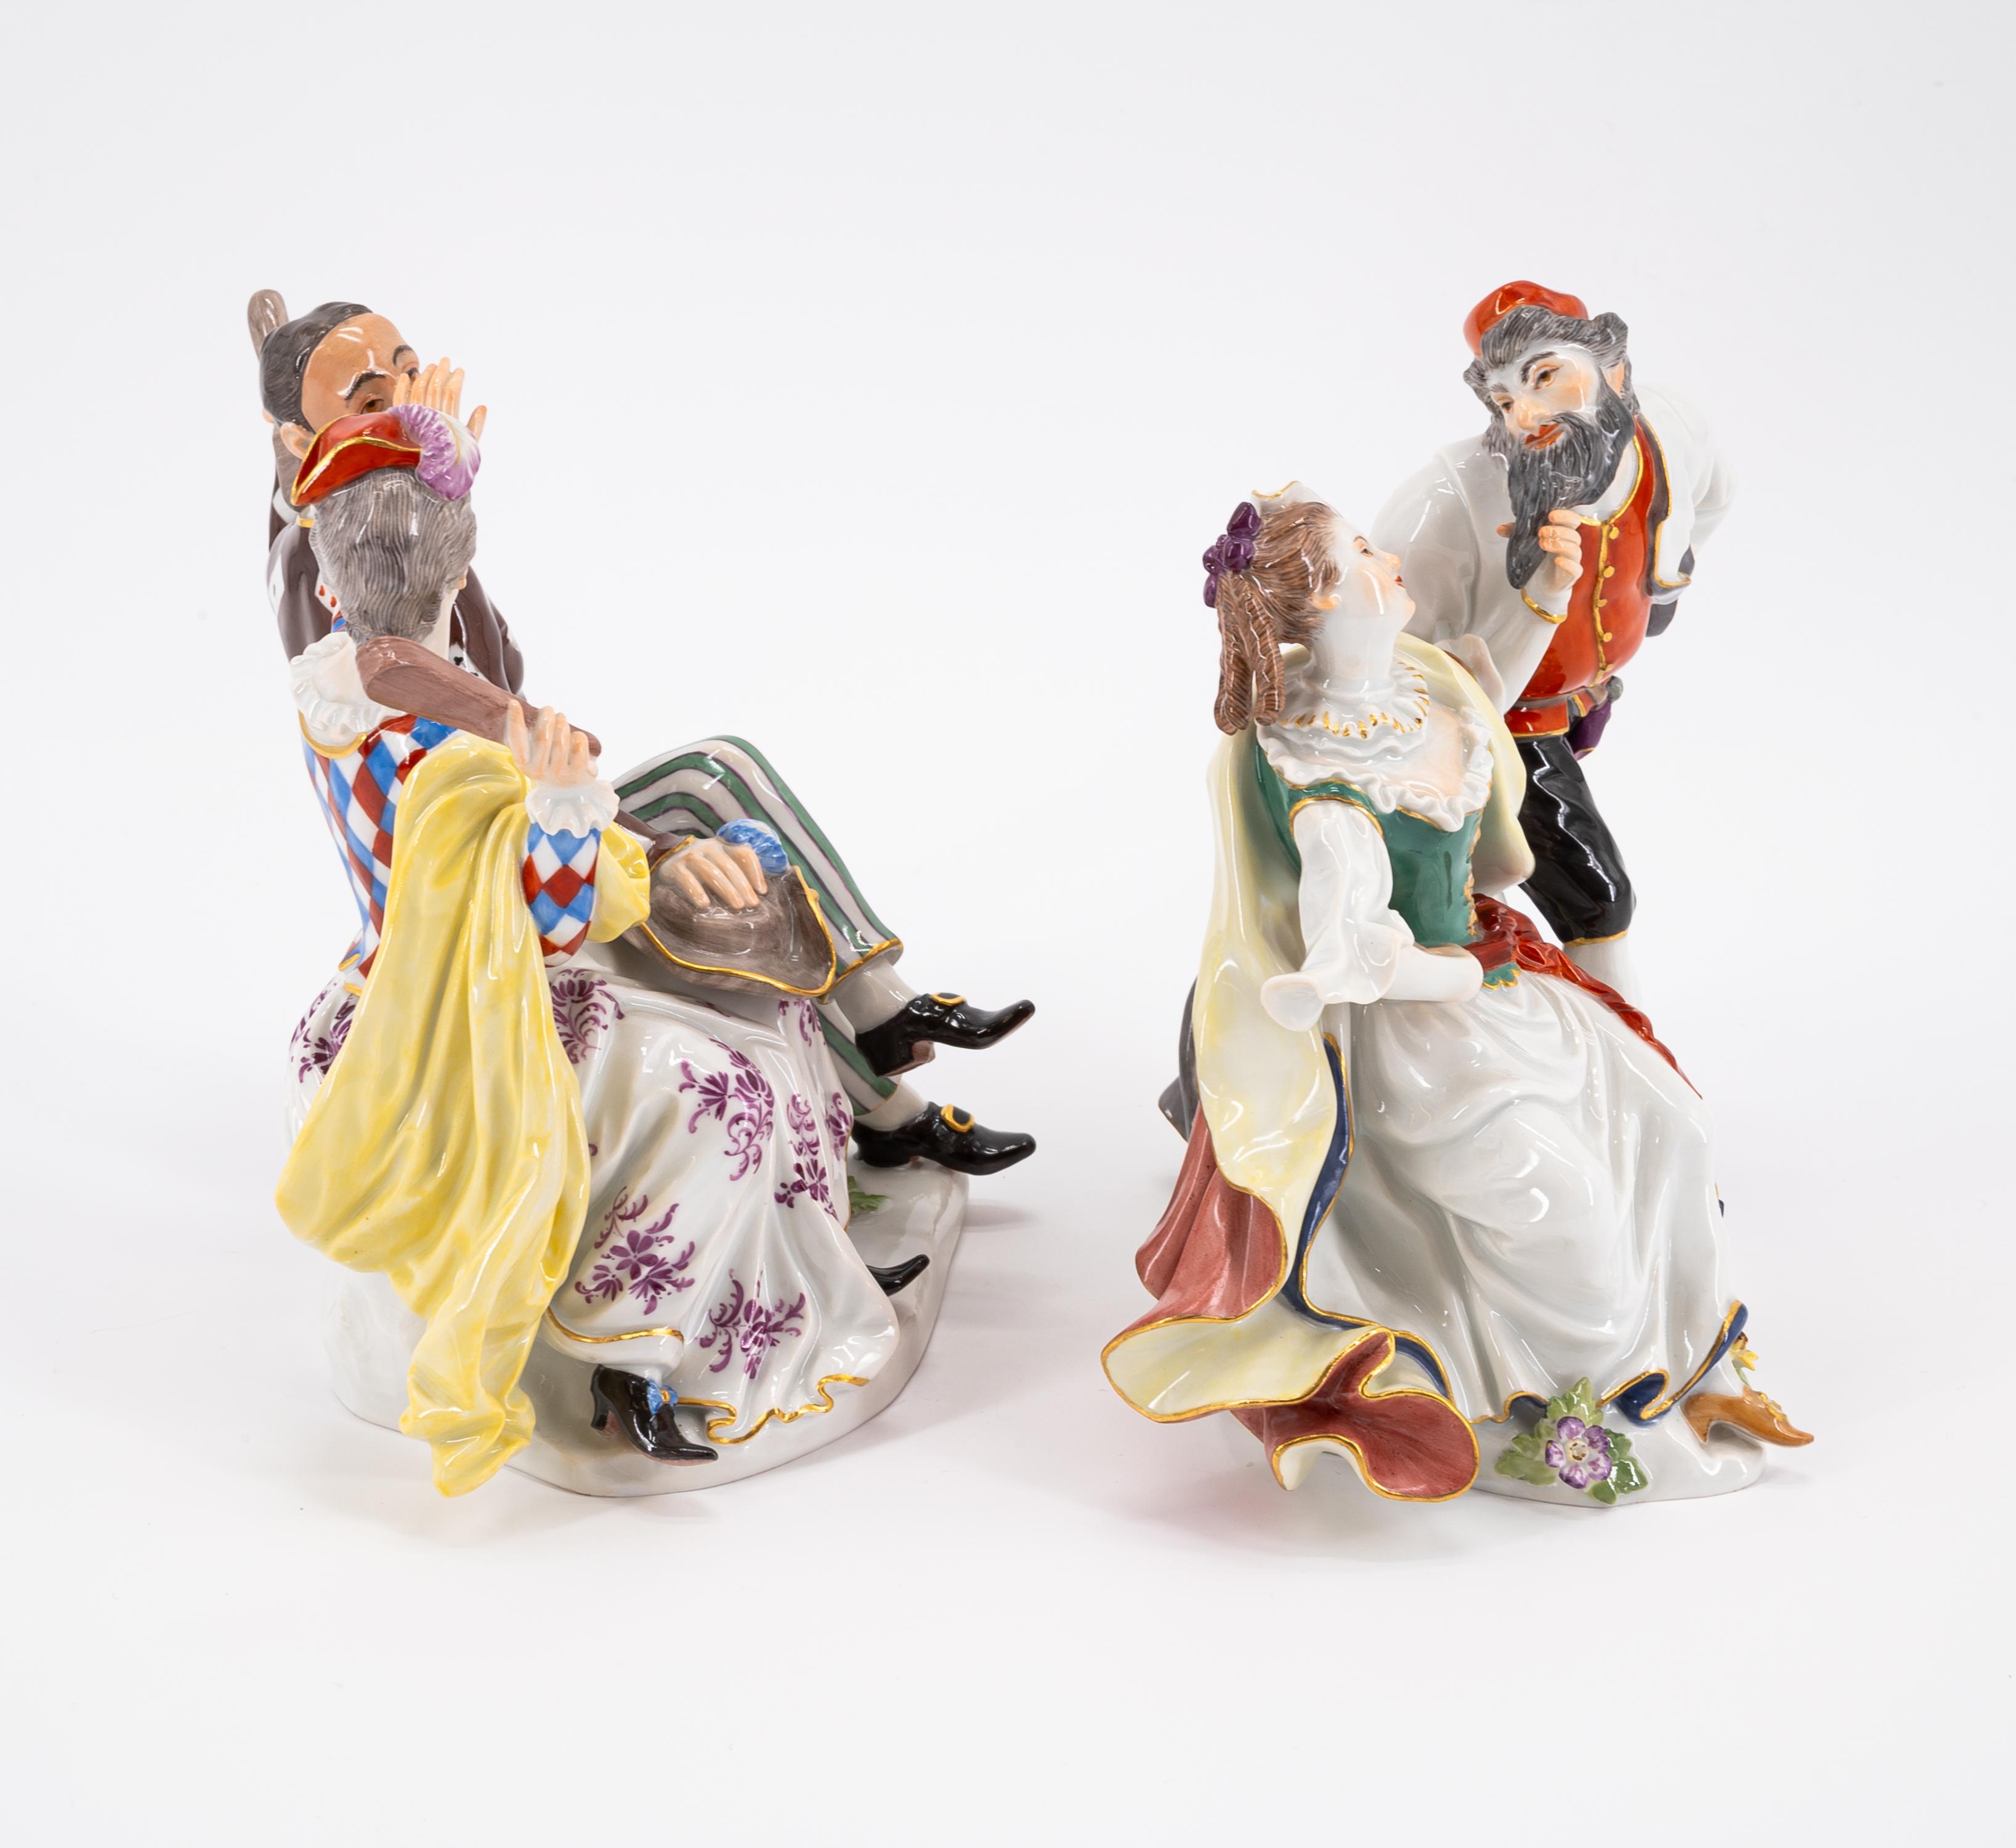 FOUR LARGE PORCELAIN COUPLES FROM THE COMMEDIA DELL'ARTE - Image 8 of 9